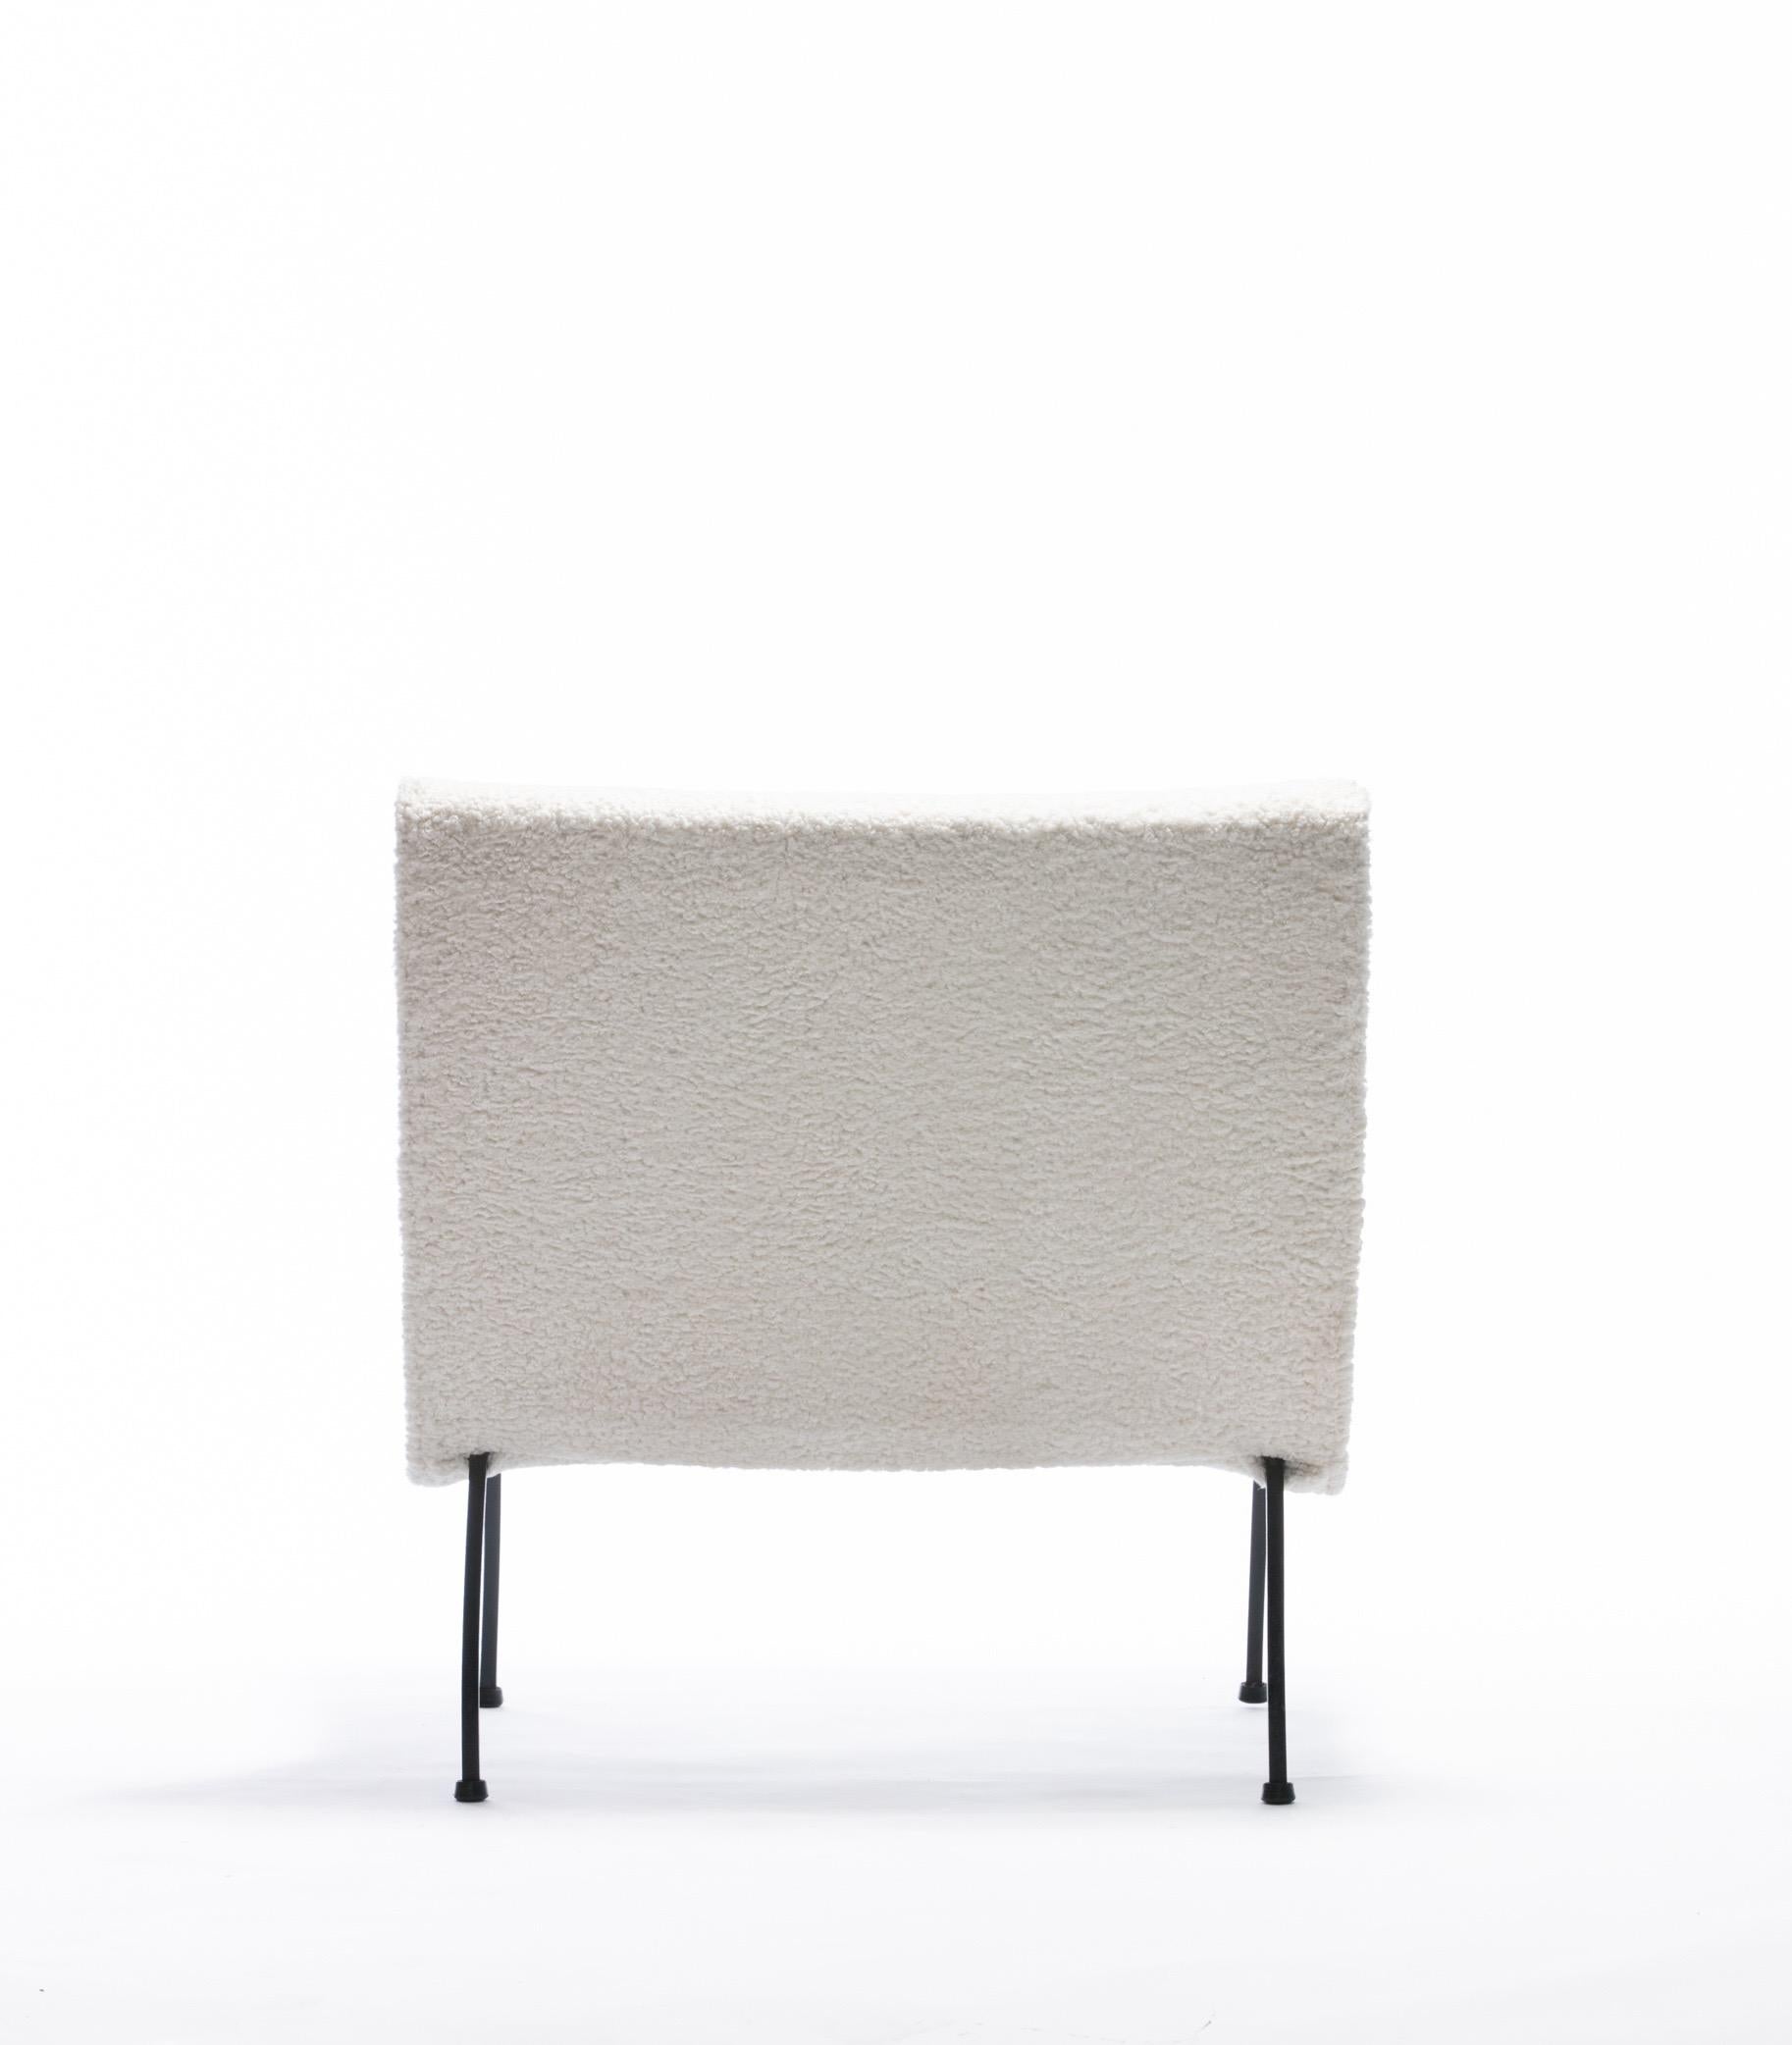 American Ivory Shearling Milo Baughman Scoop Chair with Iron Legs, Circa 1950s